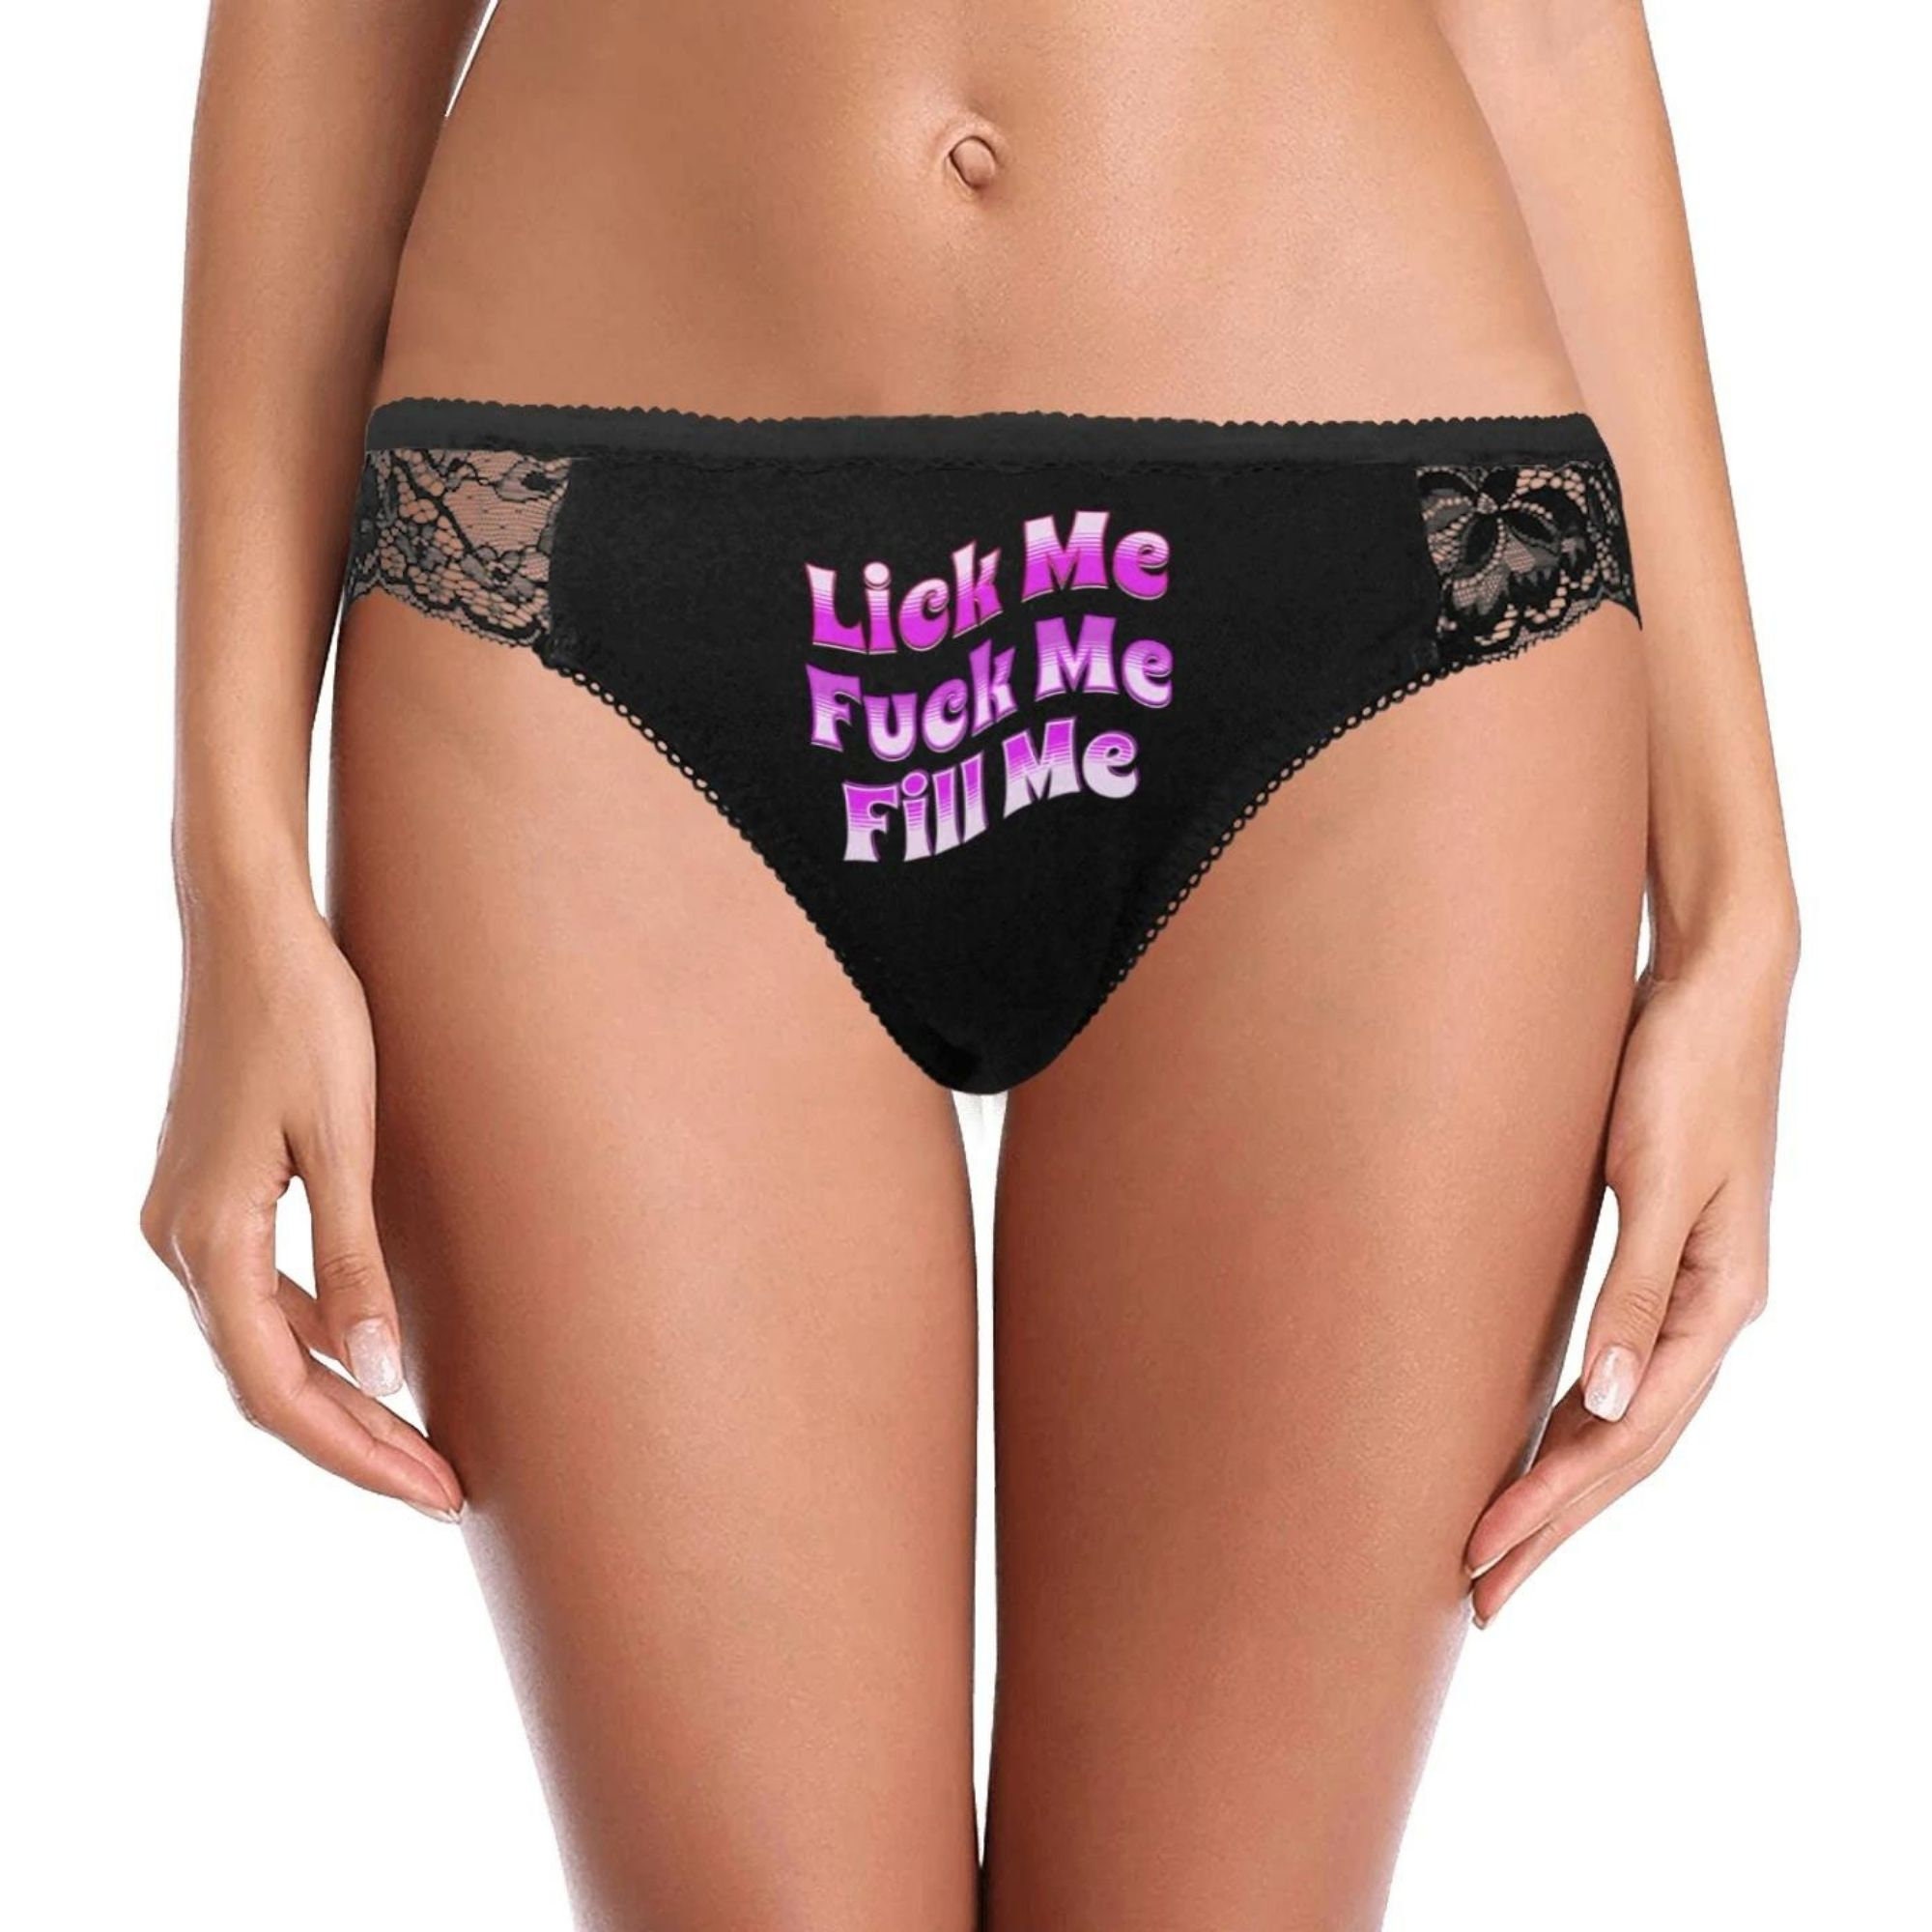 Lick Me Fuck Me Fill Me Lace Panties Hotwife Lace Lingerie picture